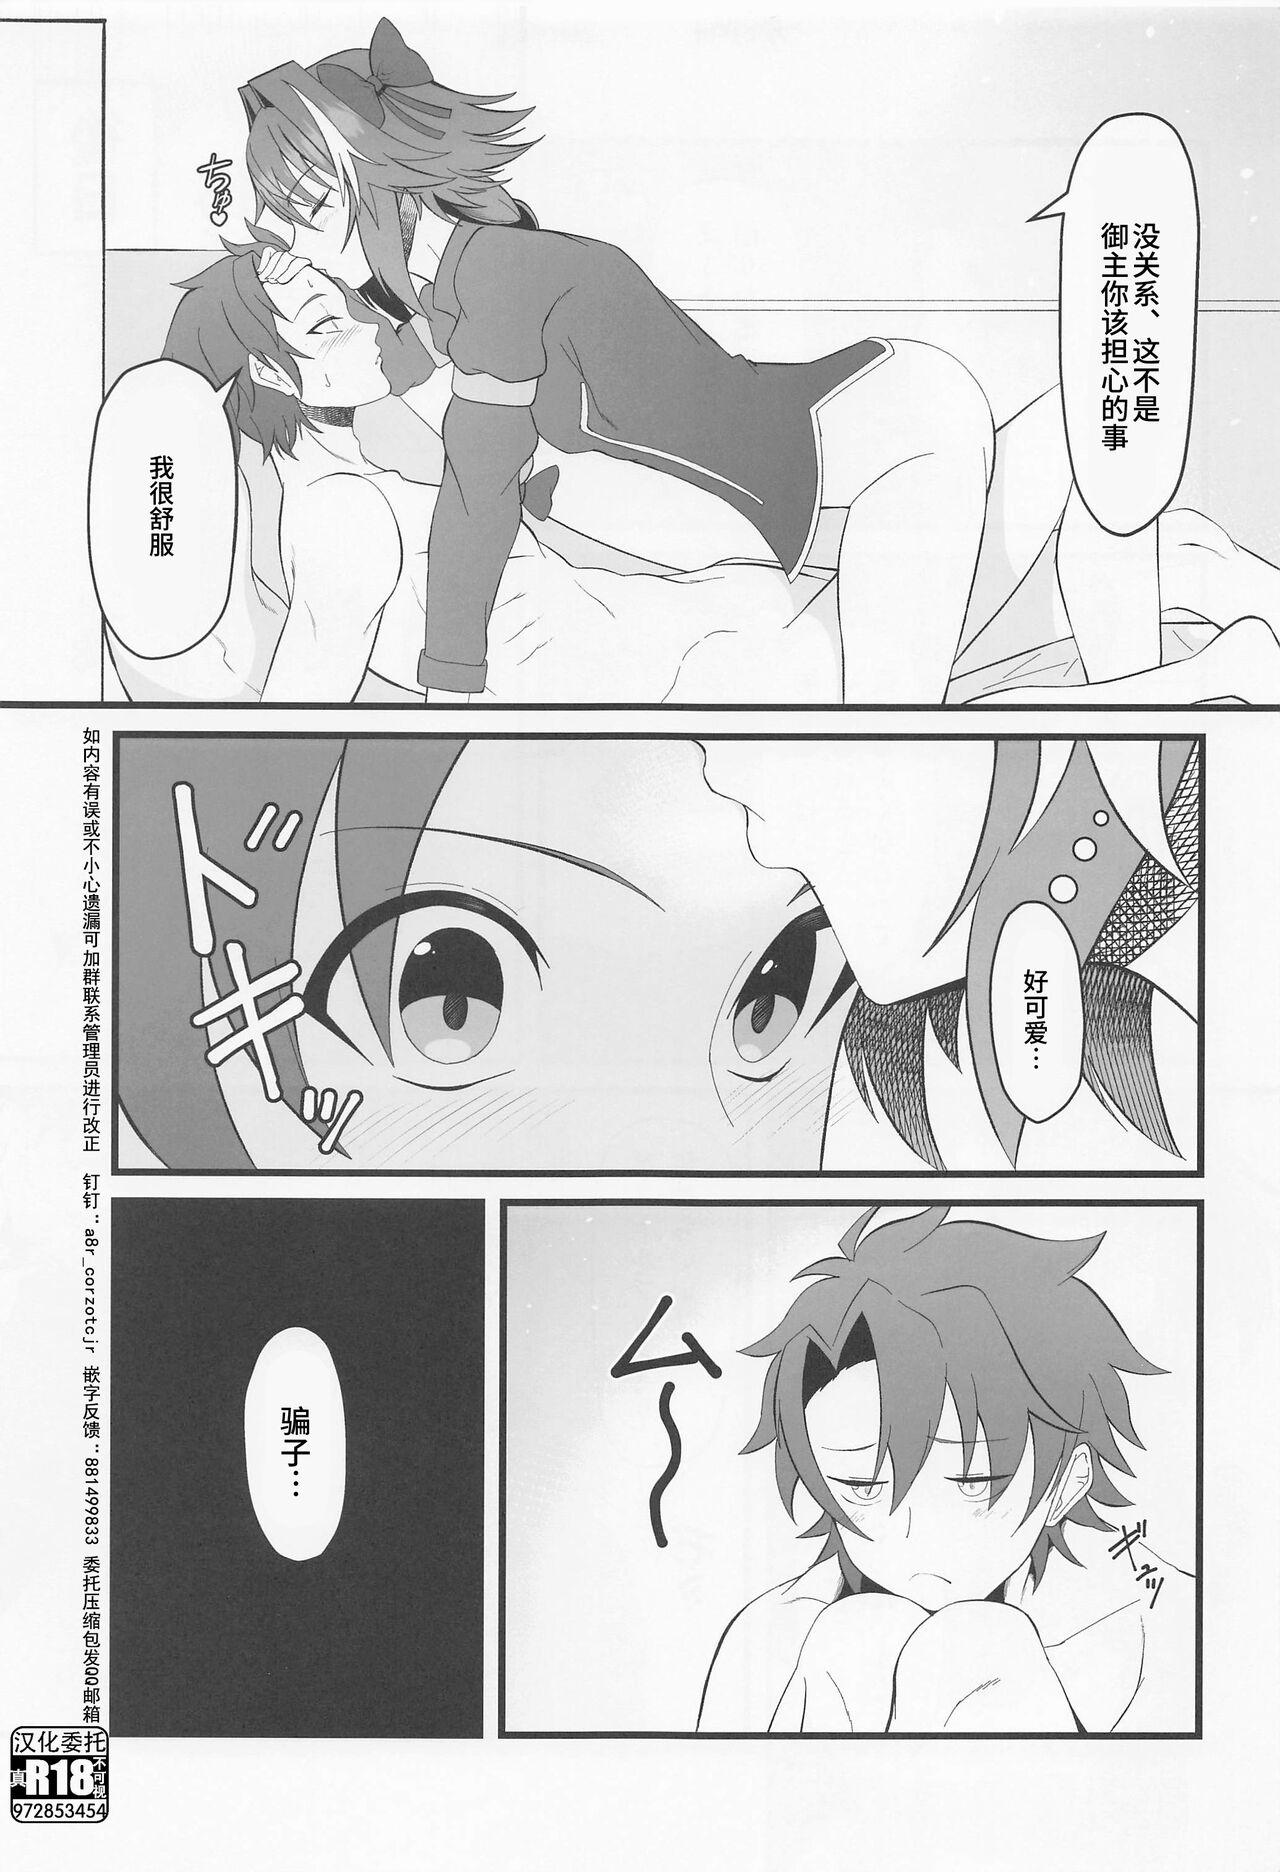 Shorts Kimi no Ichiban ni Naritakute - I wanted to be your number one. - Fate grand order Erotica - Page 4